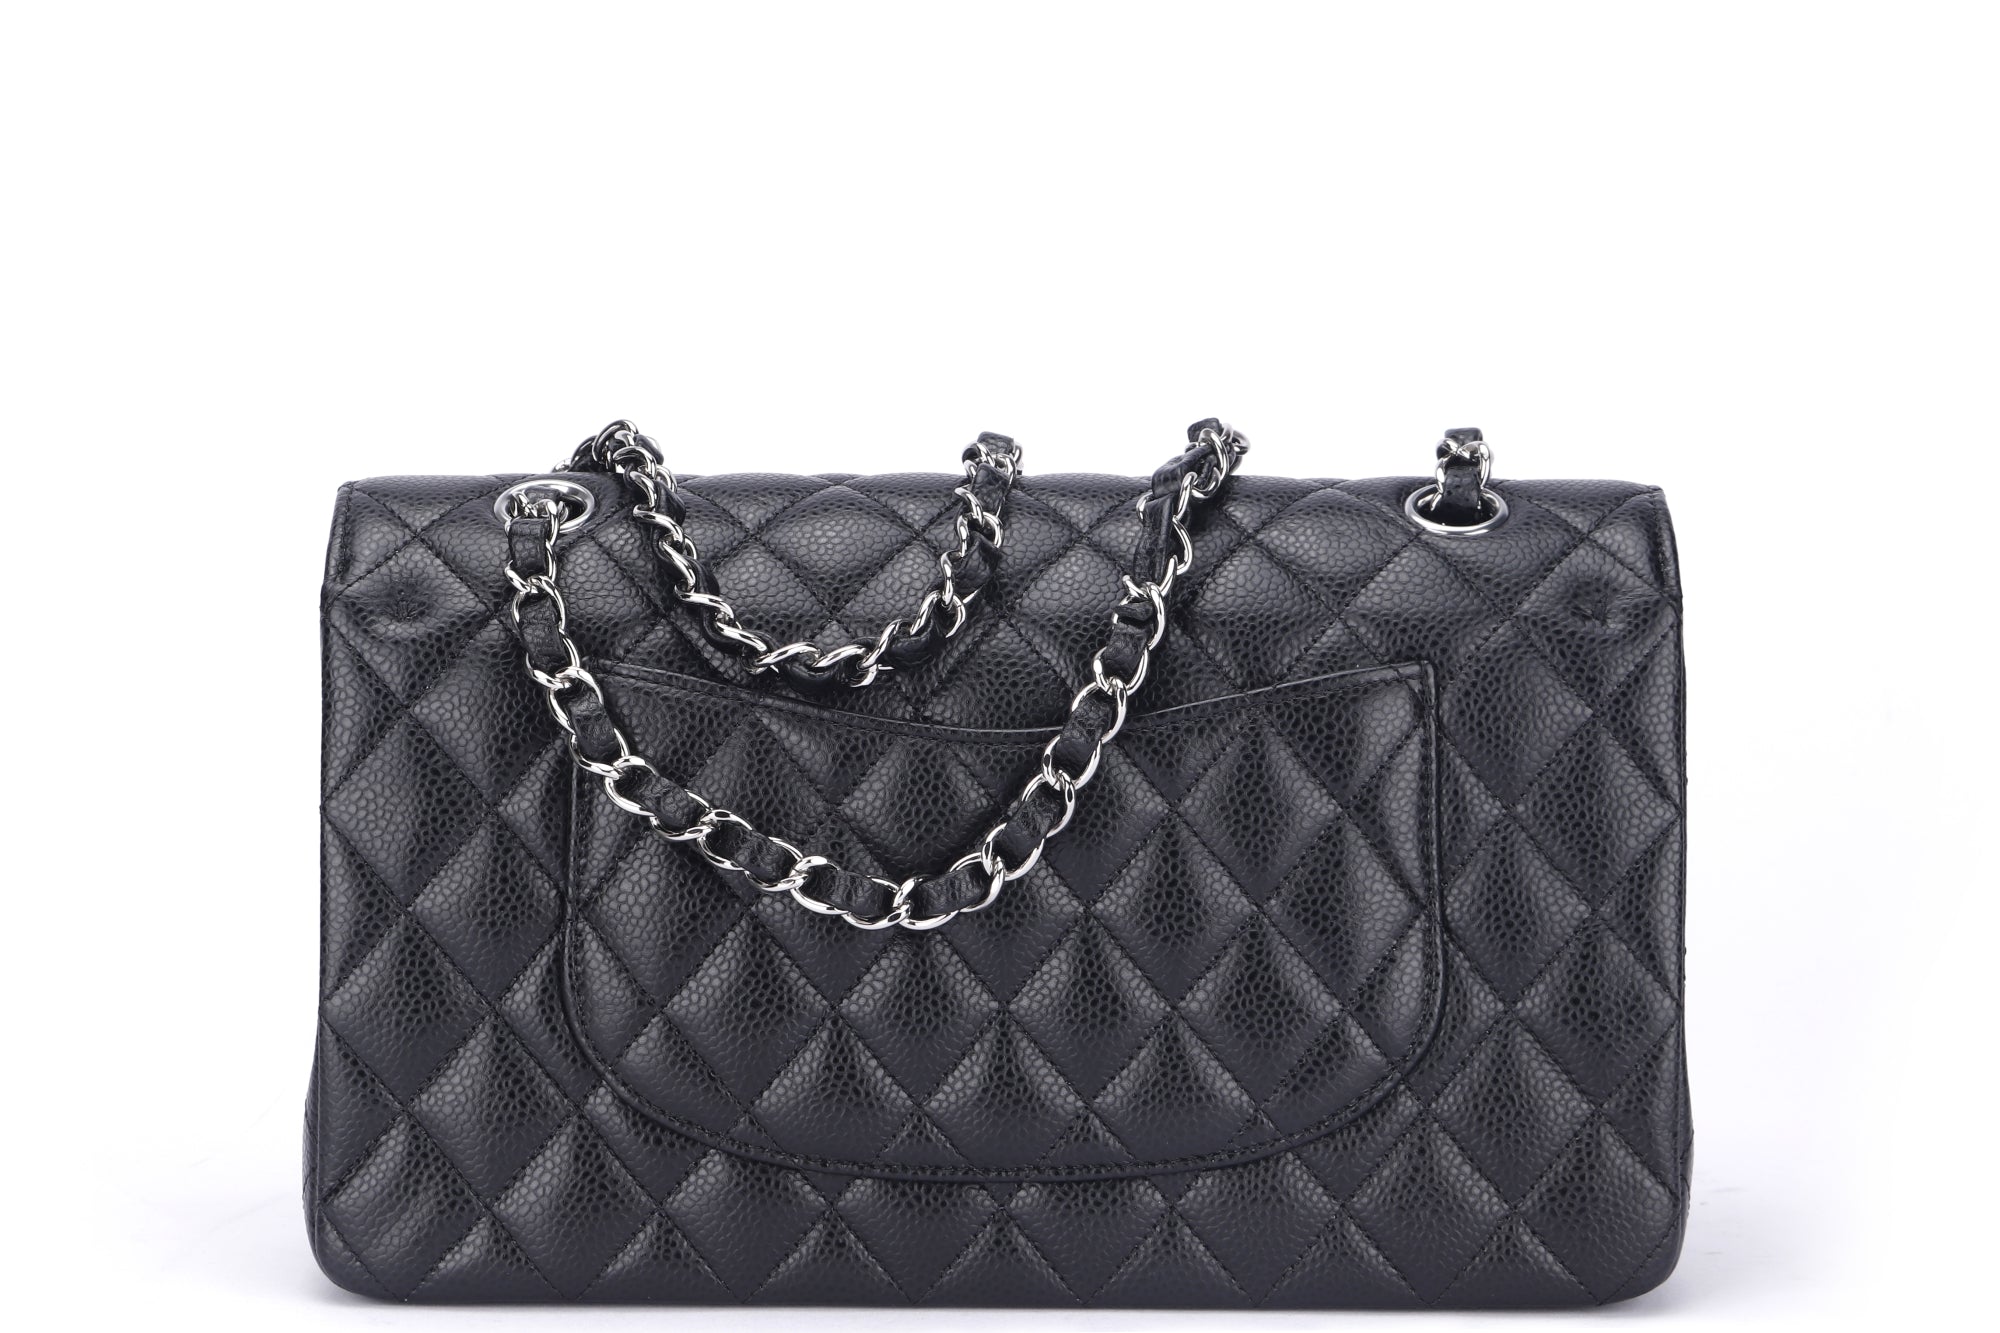 Chanel Classic Flap (2676xxxx) Medium Size Black Caviar Leather, Silver Hardware, with Card, Dust Cover & Box